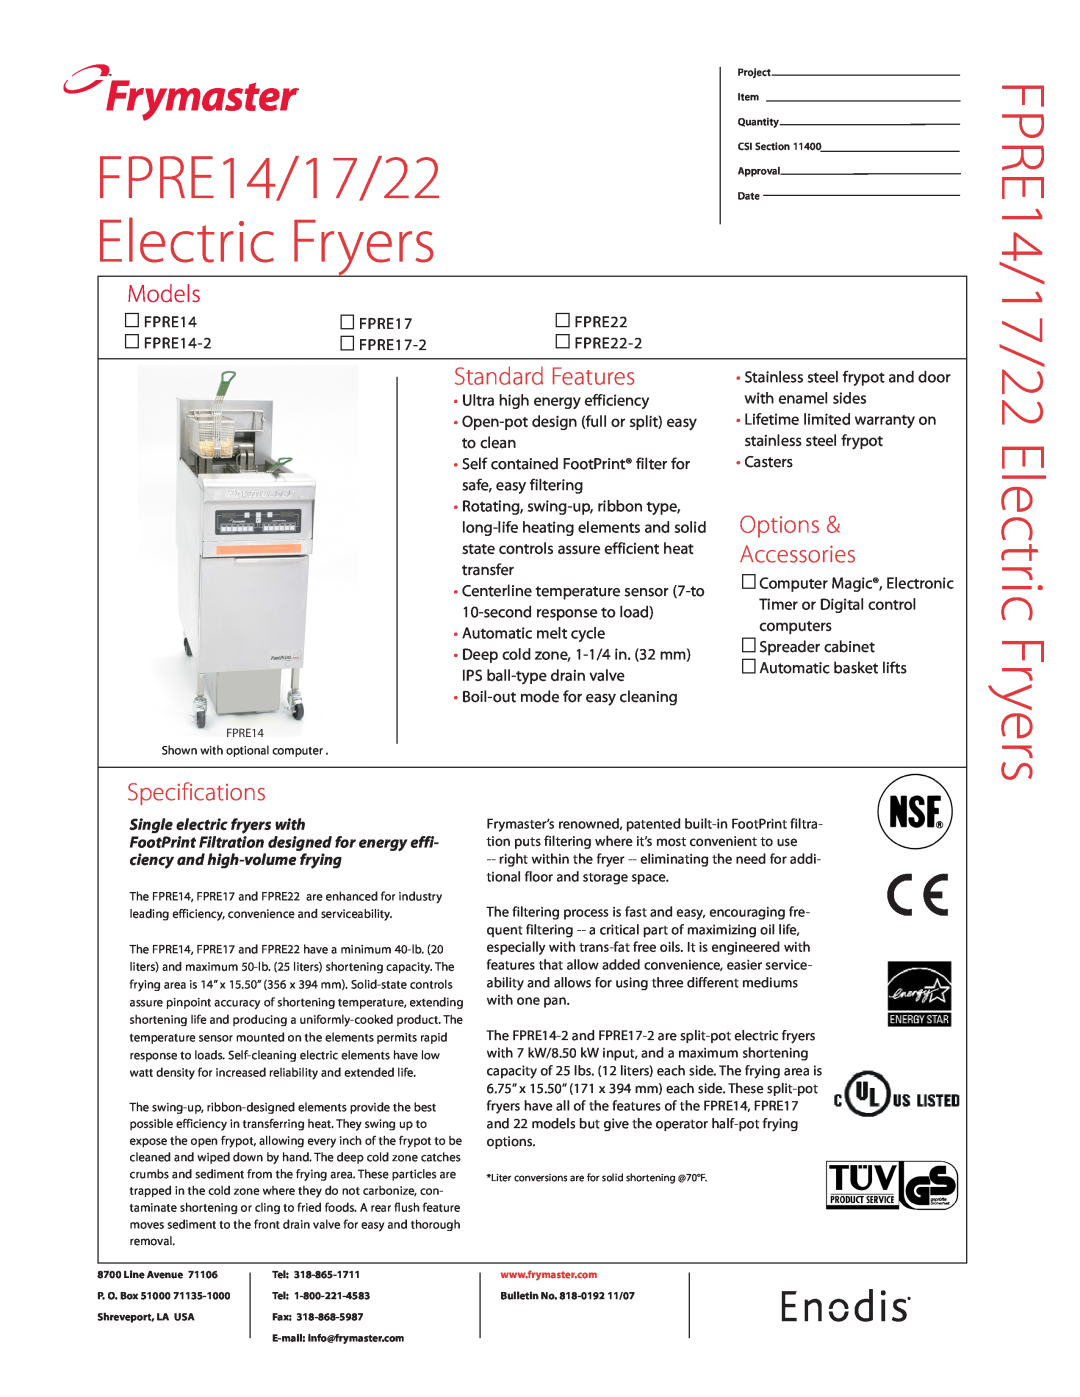 Frymaster FPRE22, FPRE17 specifications Frymaster, FPRE14/17/22 Electric Fryers, Models, Standard Features, Options 